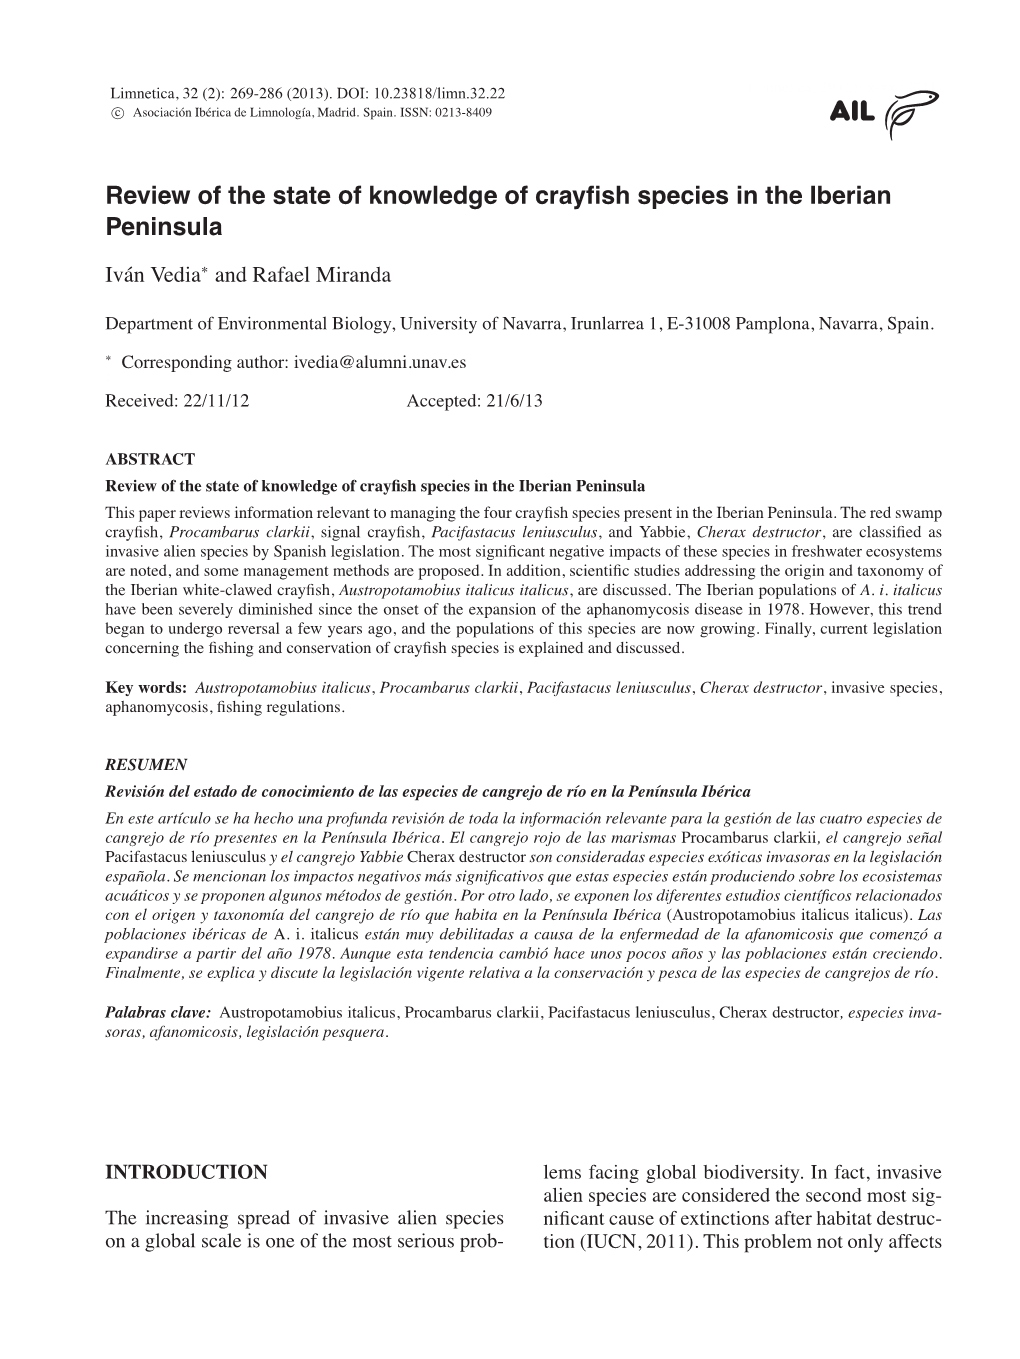 Review of the State of Knowledge of Crayfish Species in the Iberian